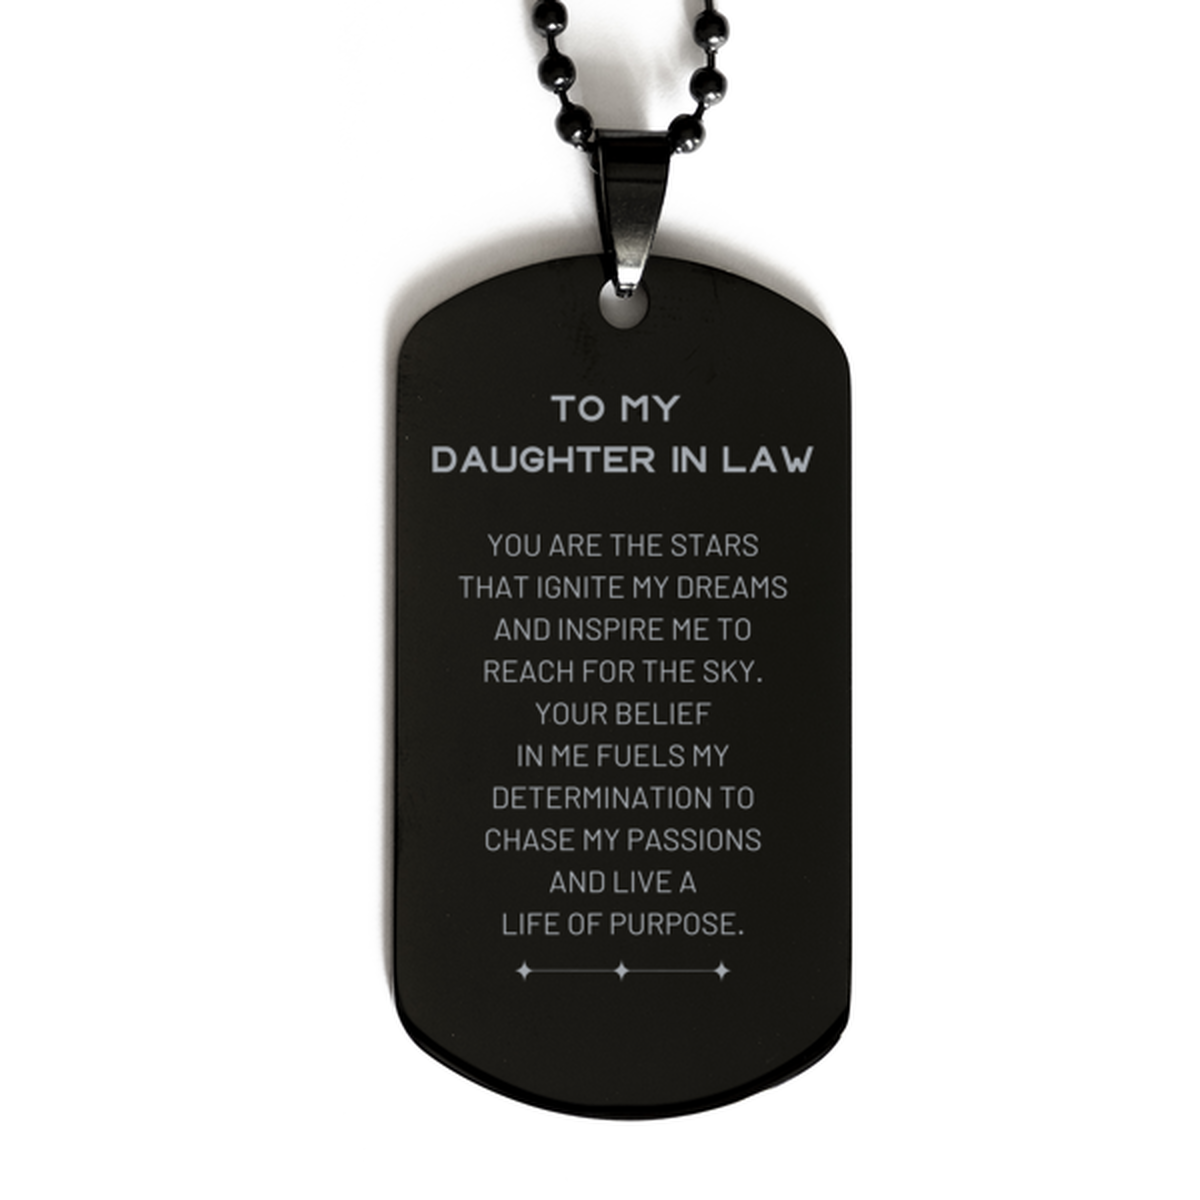 To My Daughter In Law Black Dog Tag, You are the stars that ignite my dreams and inspire me to reach for the sky, Birthday Unique Gifts For Daughter In Law, Thank You Gifts For Daughter In Law